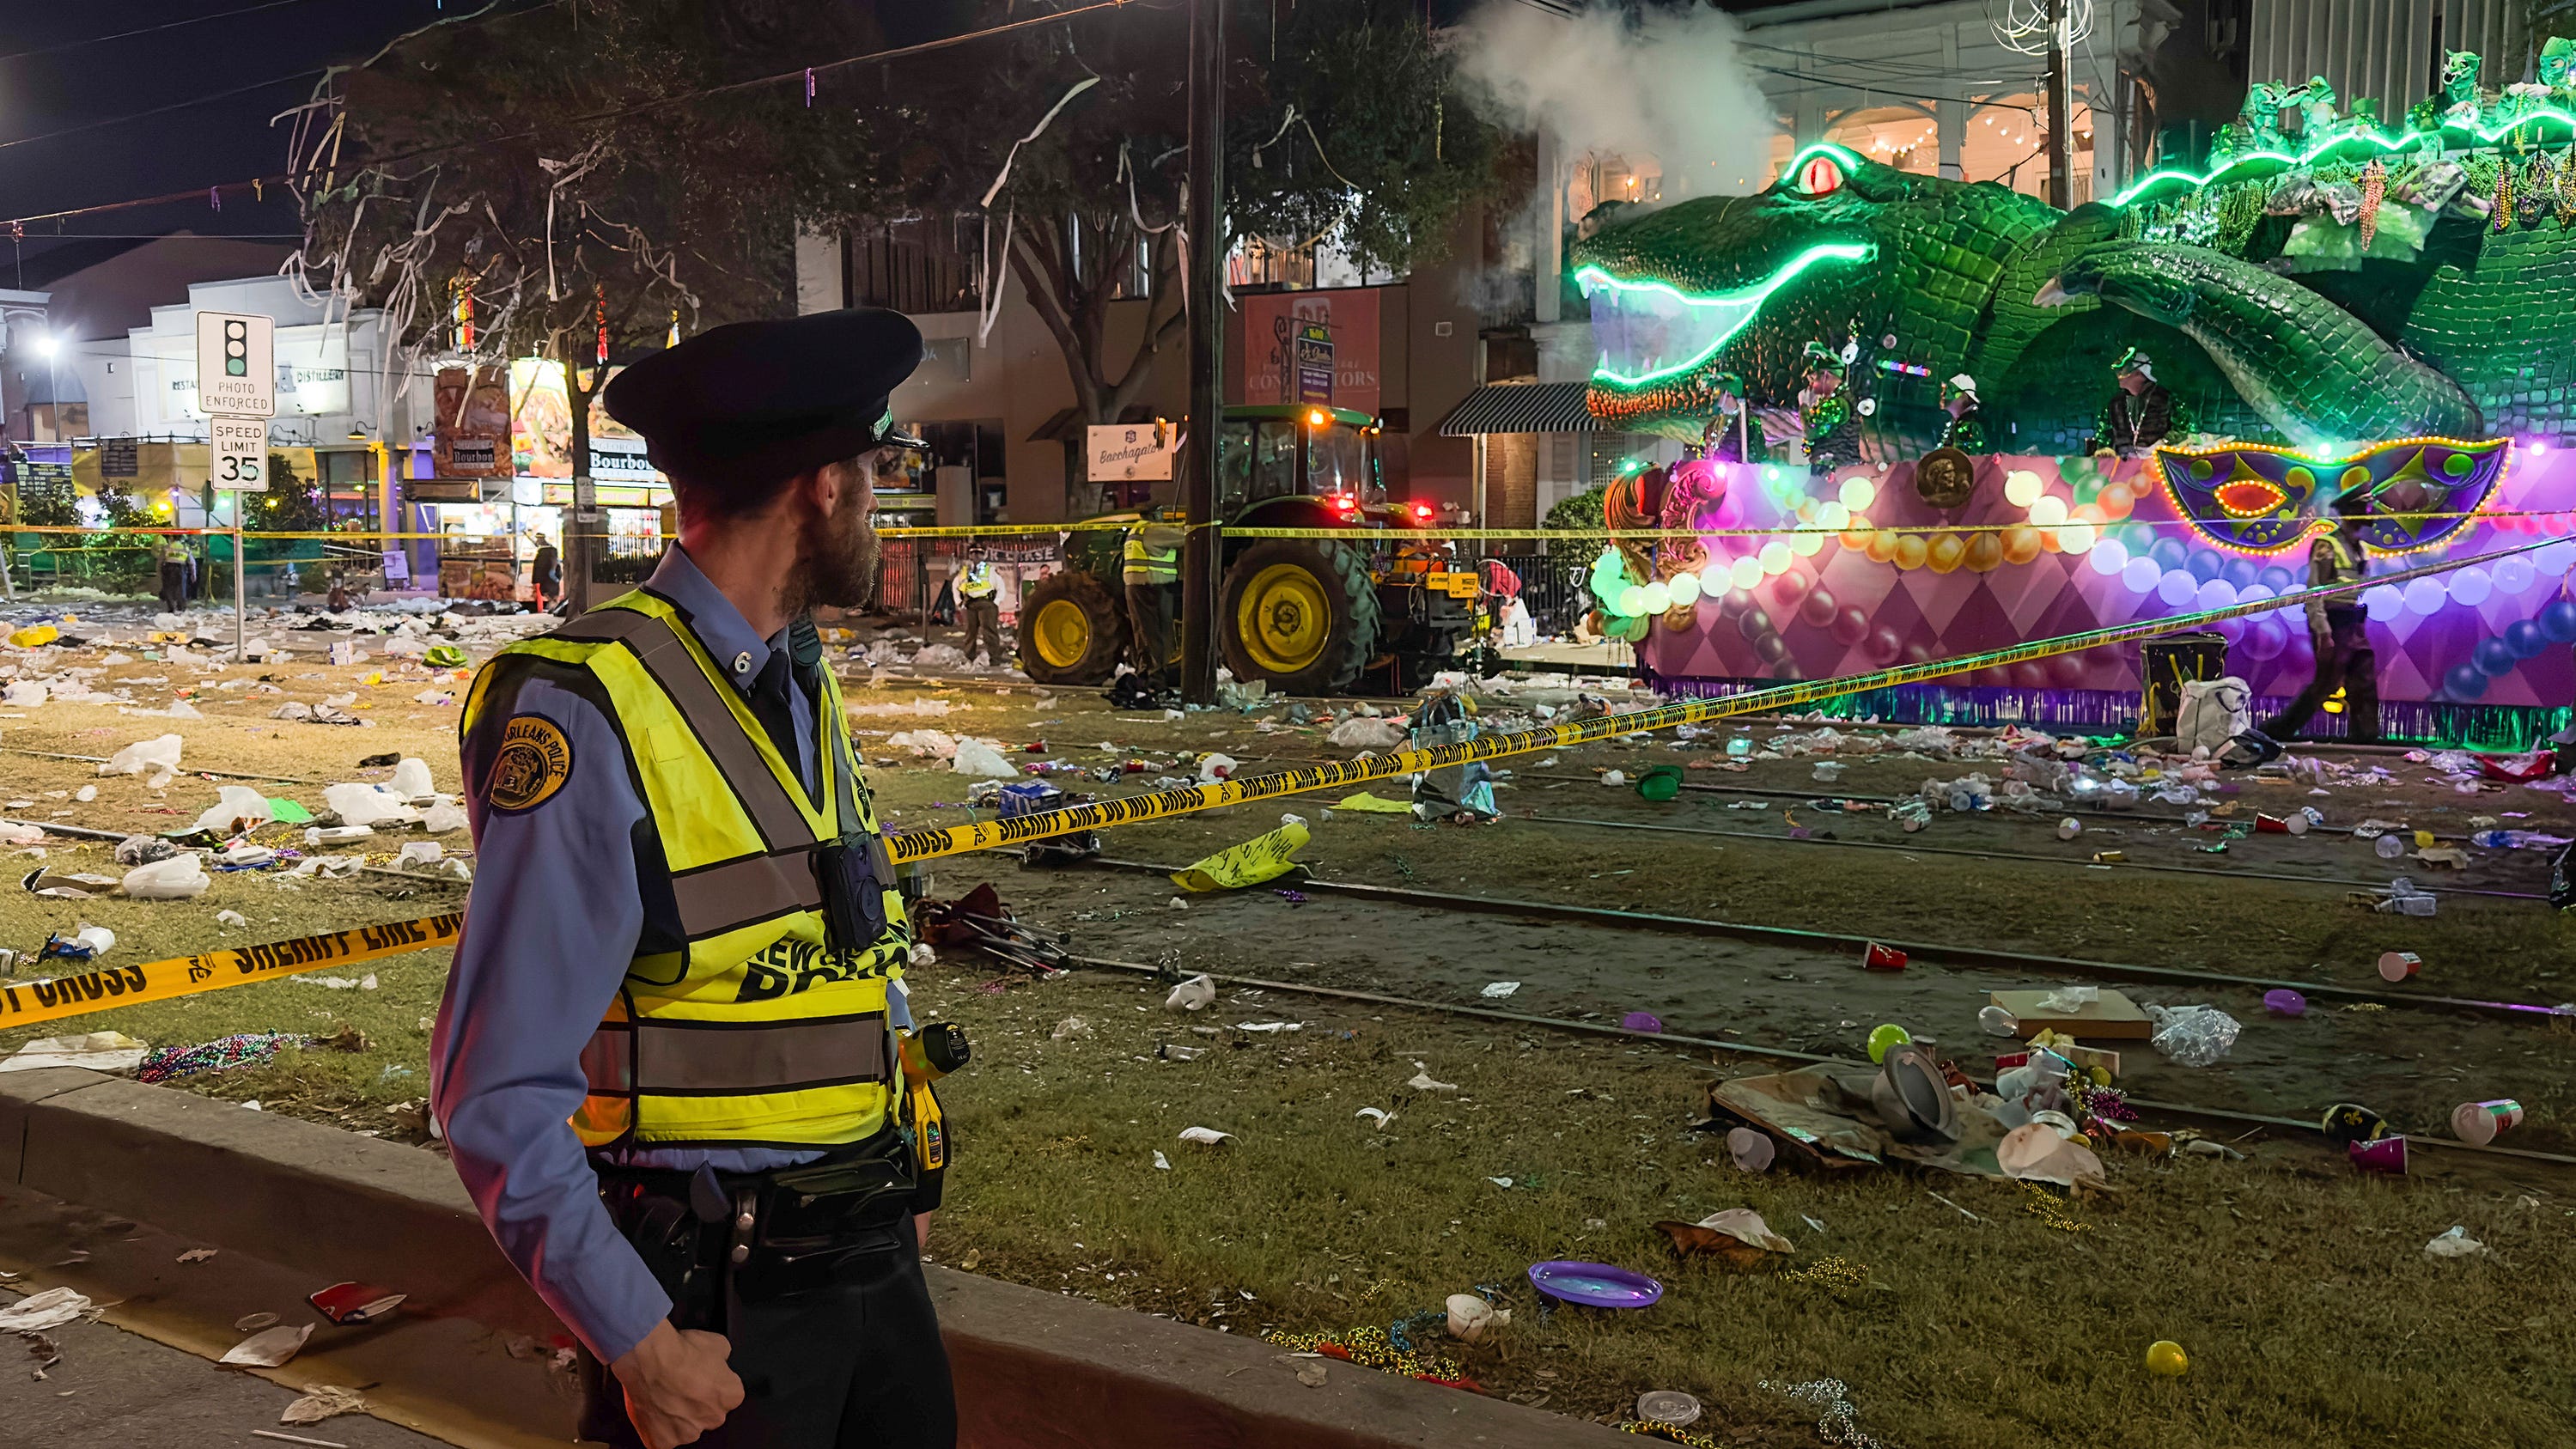 Police work the scene of a shooting at the Krewe of Bacchus parade on Sunday, Feb. 19, 2023.  Five people were shot, including a young girl, during a Mardi Gras parade in New Orleans, police said, and a suspect was in custody.